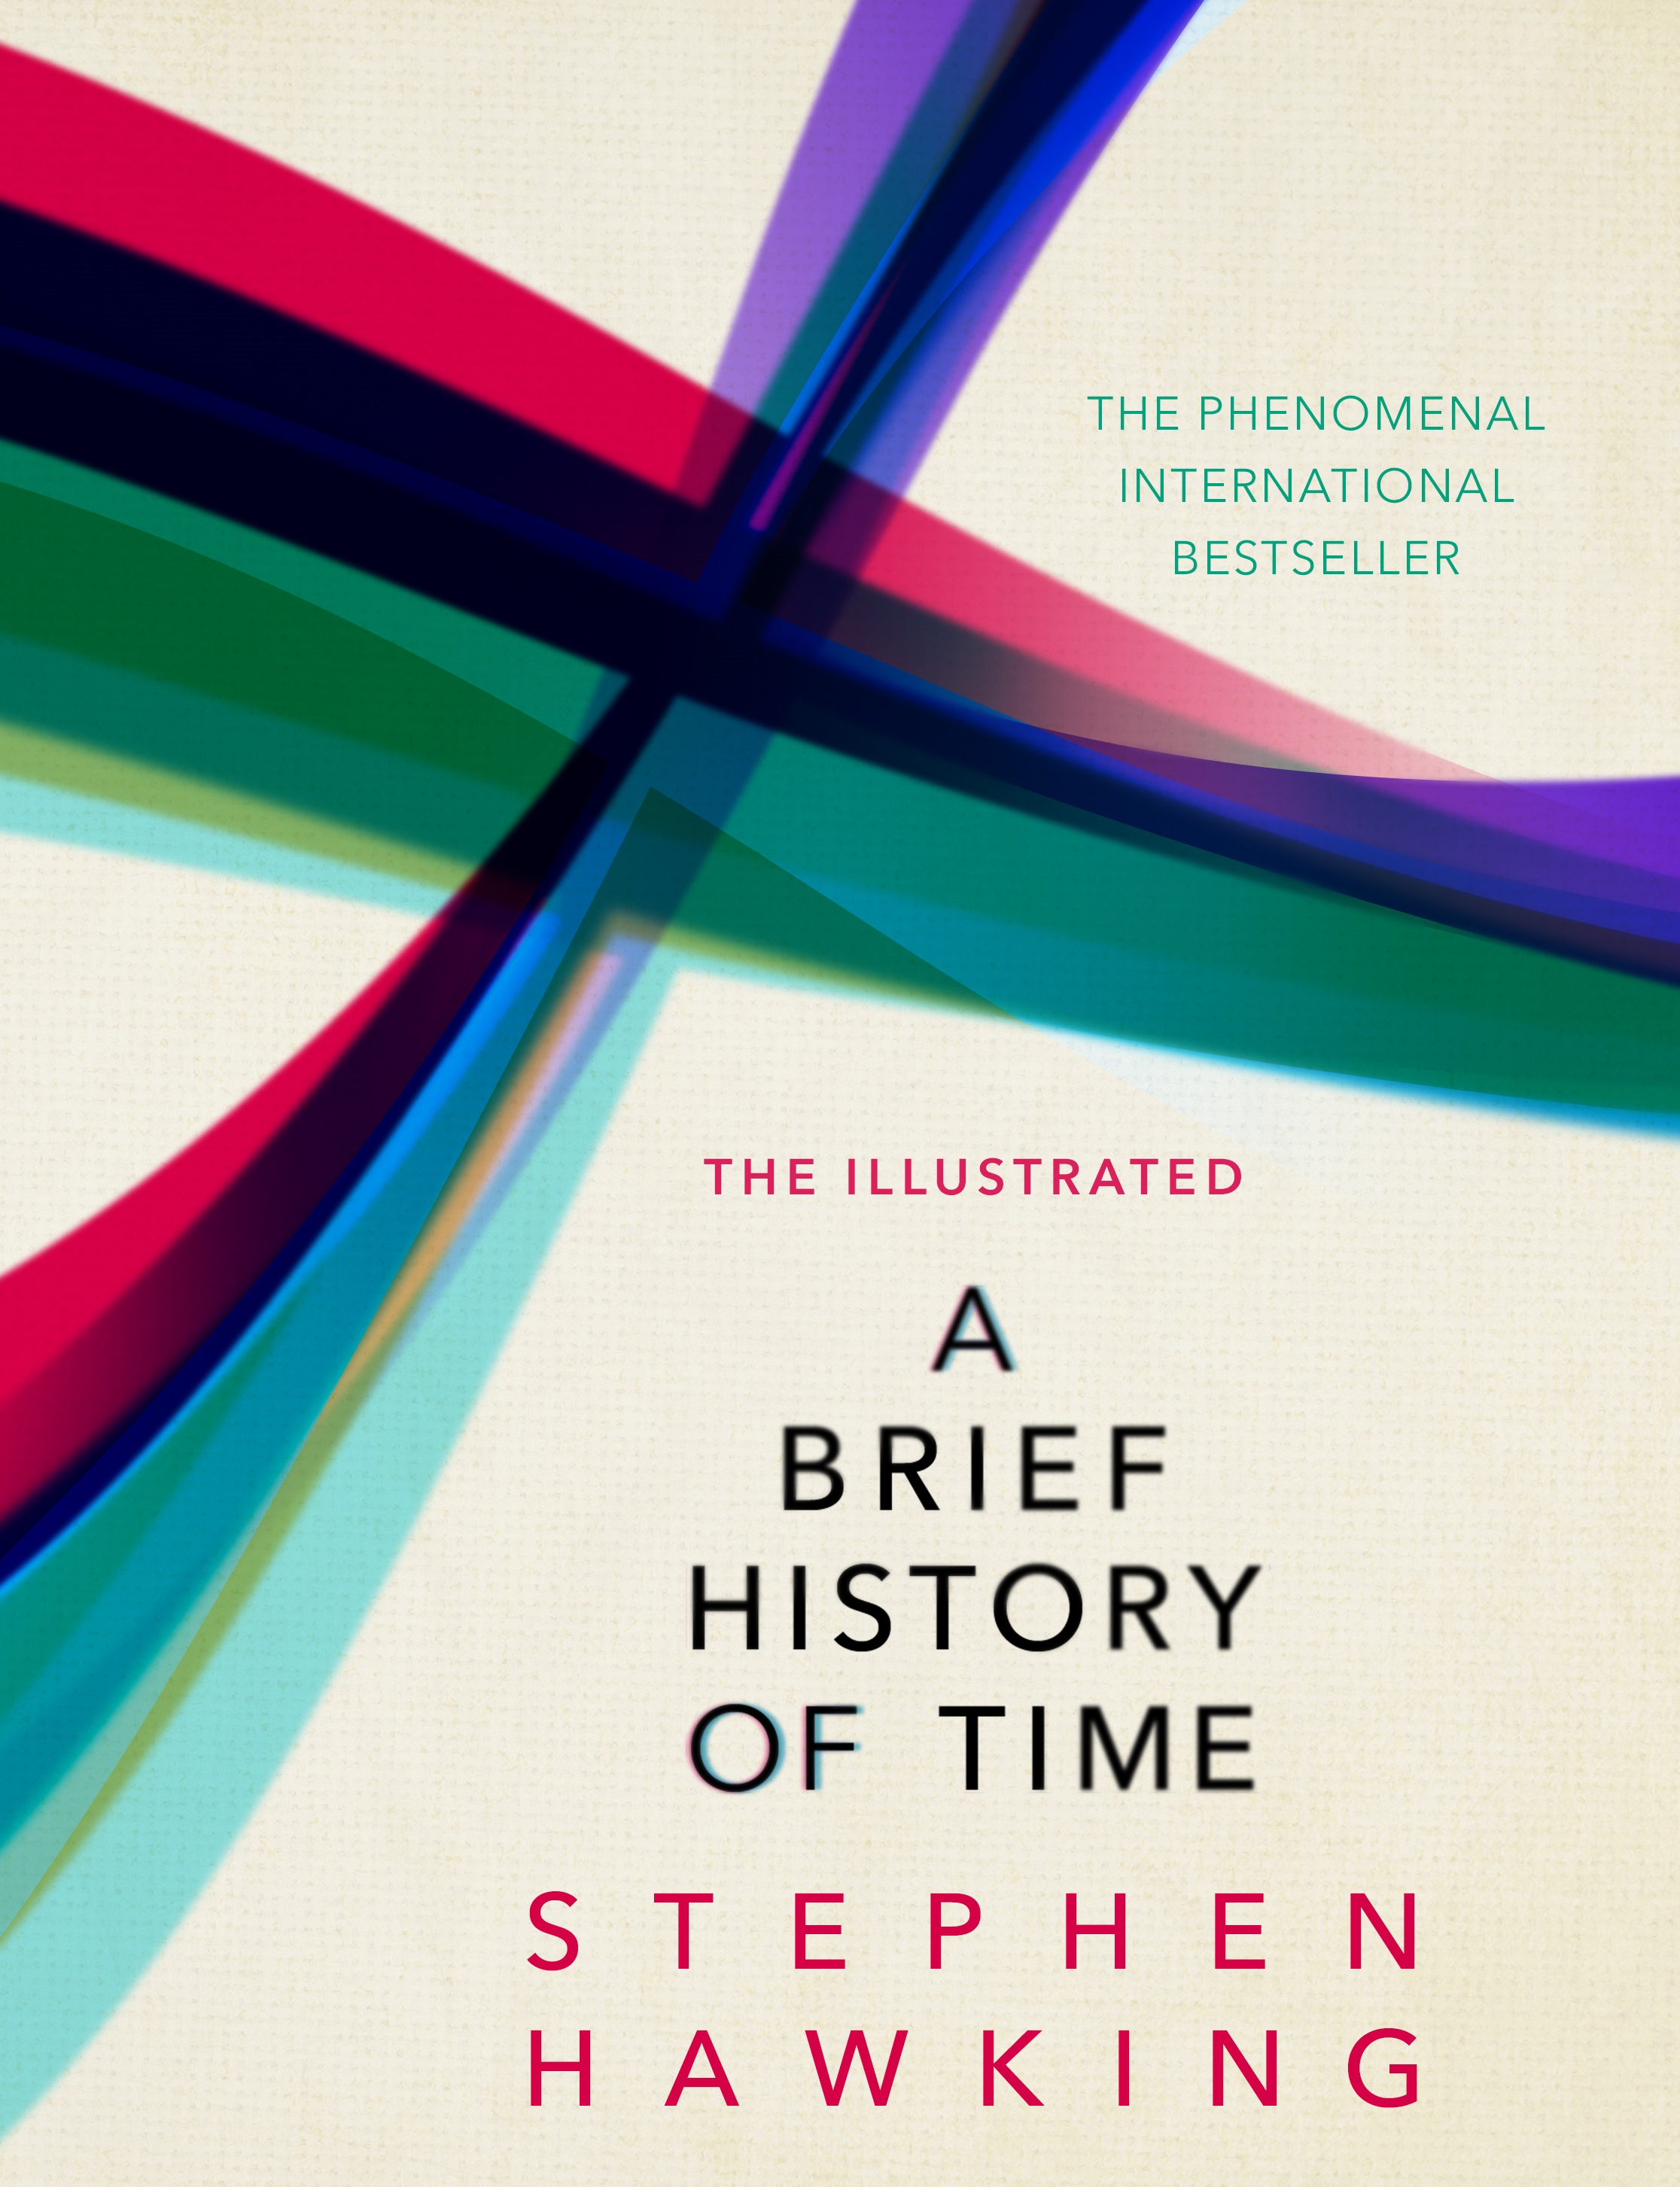 the illustrated brief history of time download